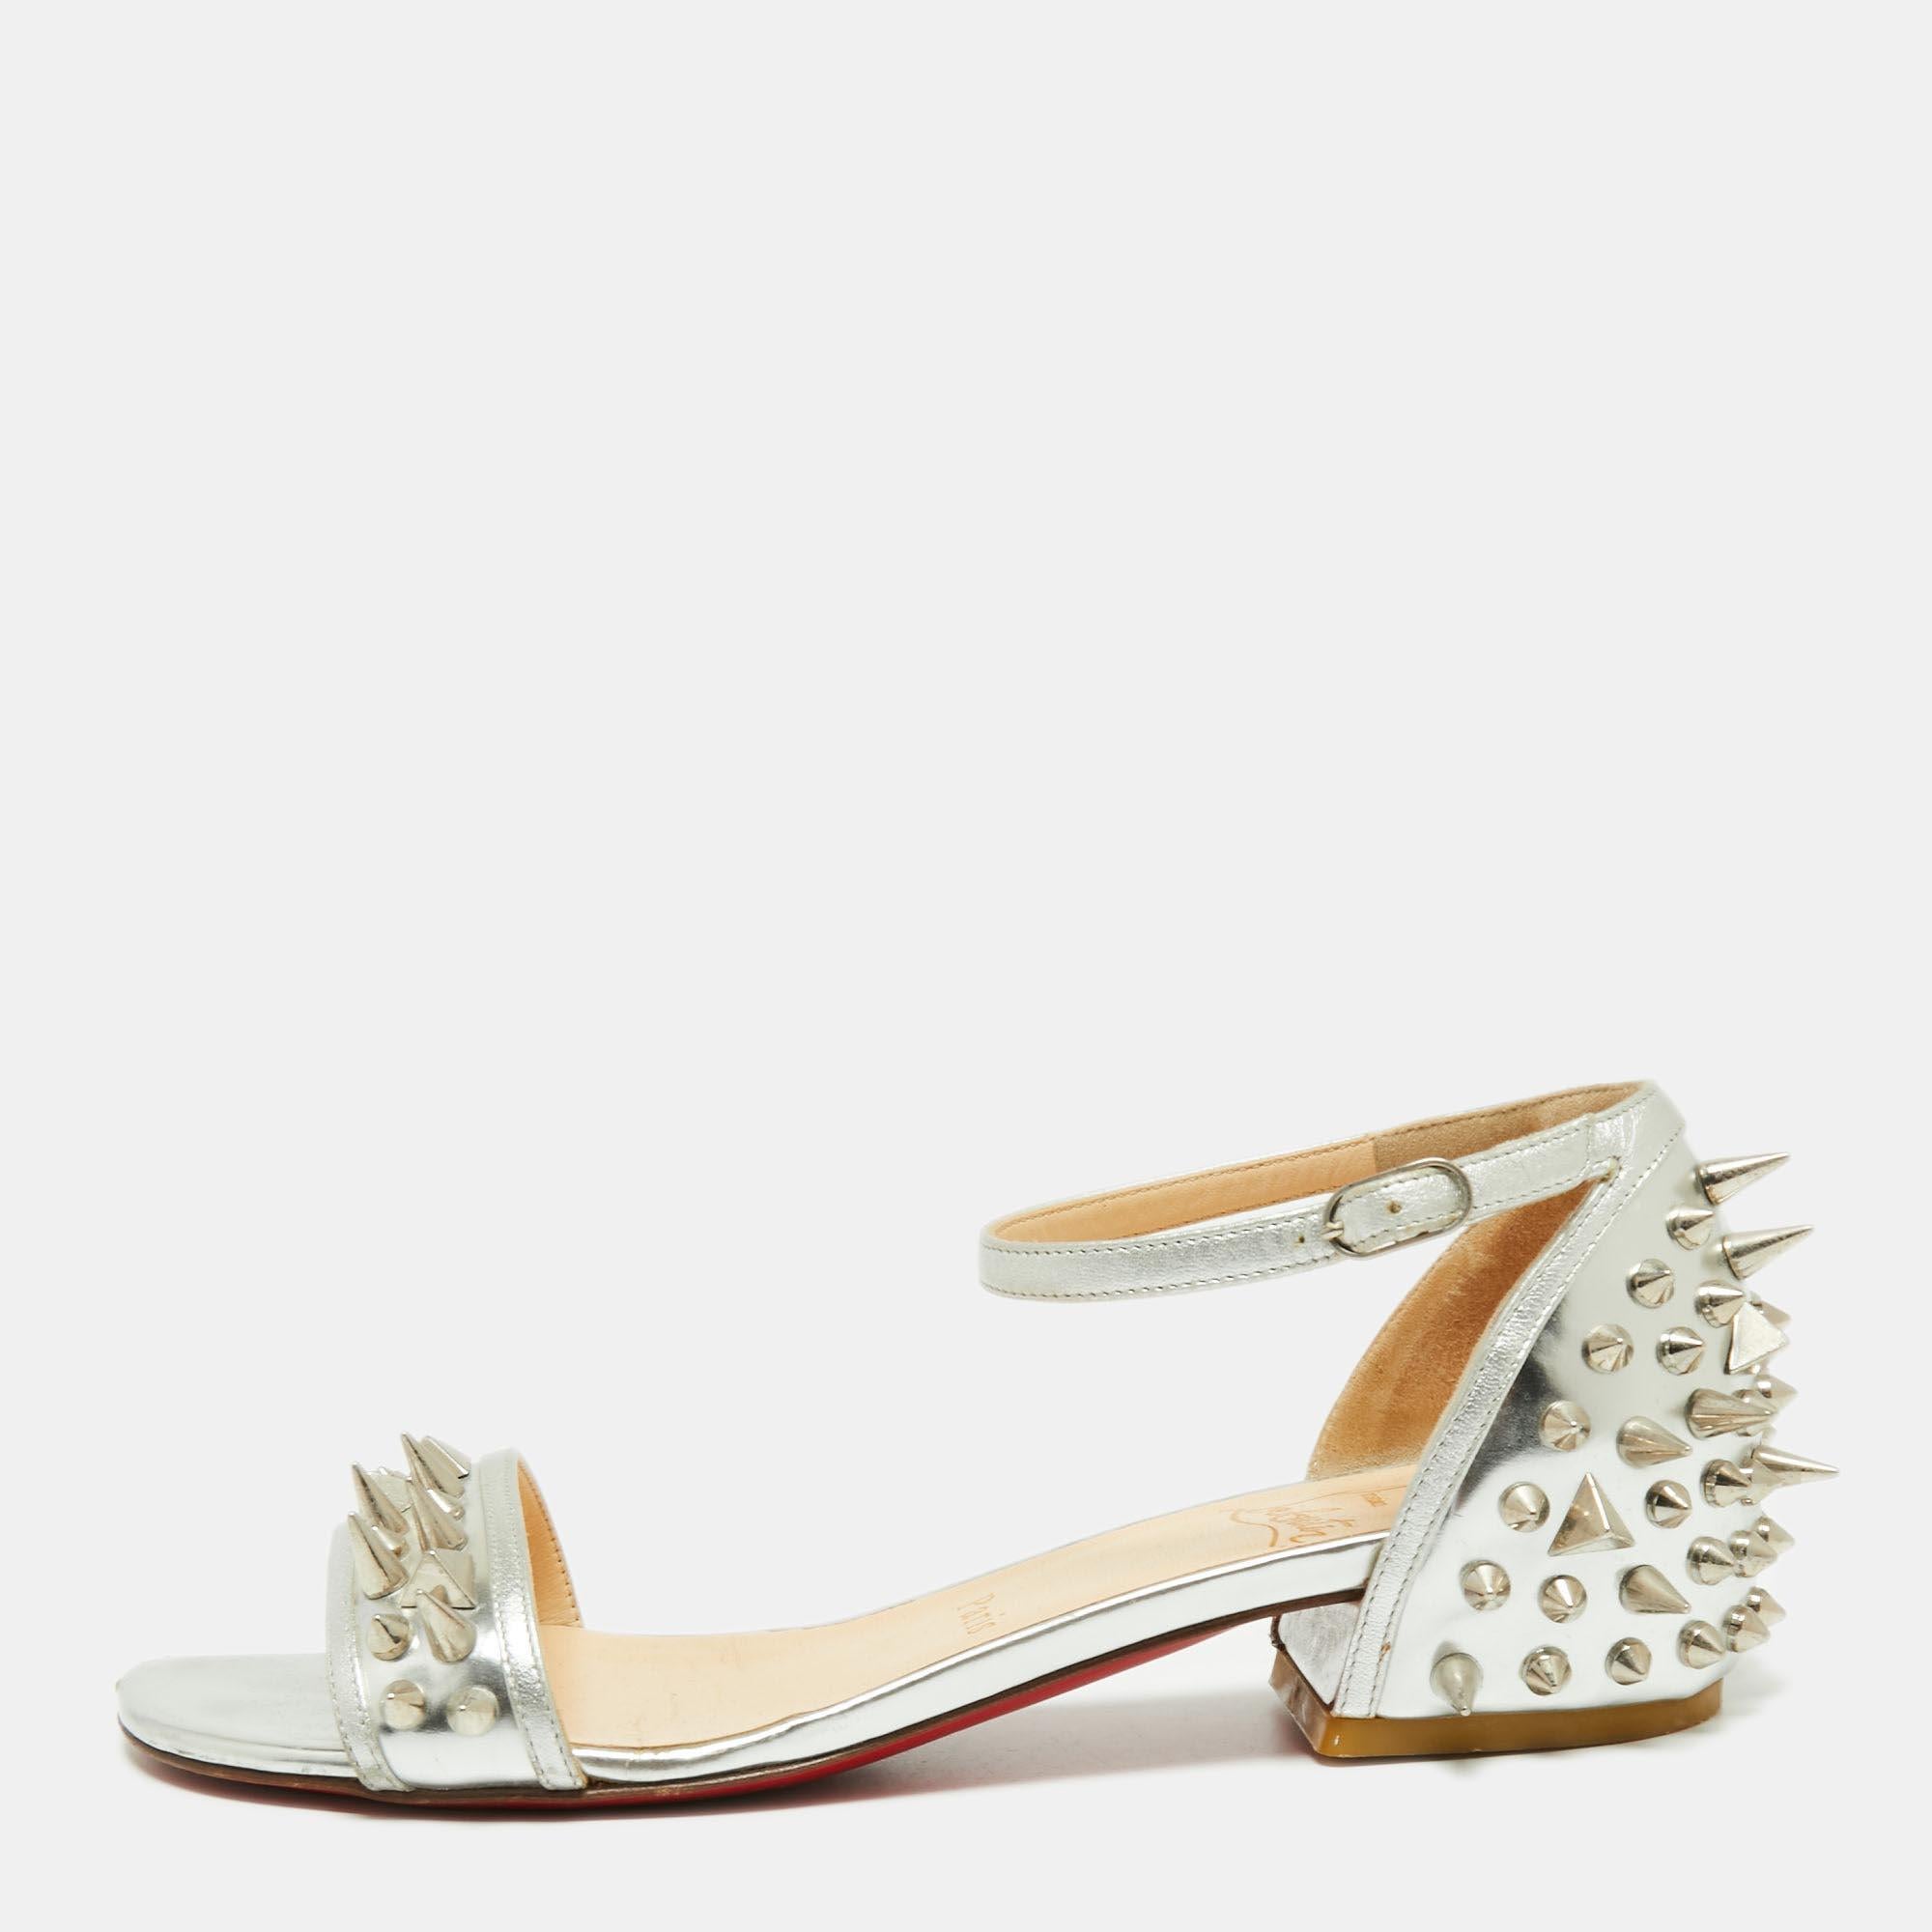 Christian Louboutin Silver Leather Studded Druide Ankle-Strap Sandals Size 35.5